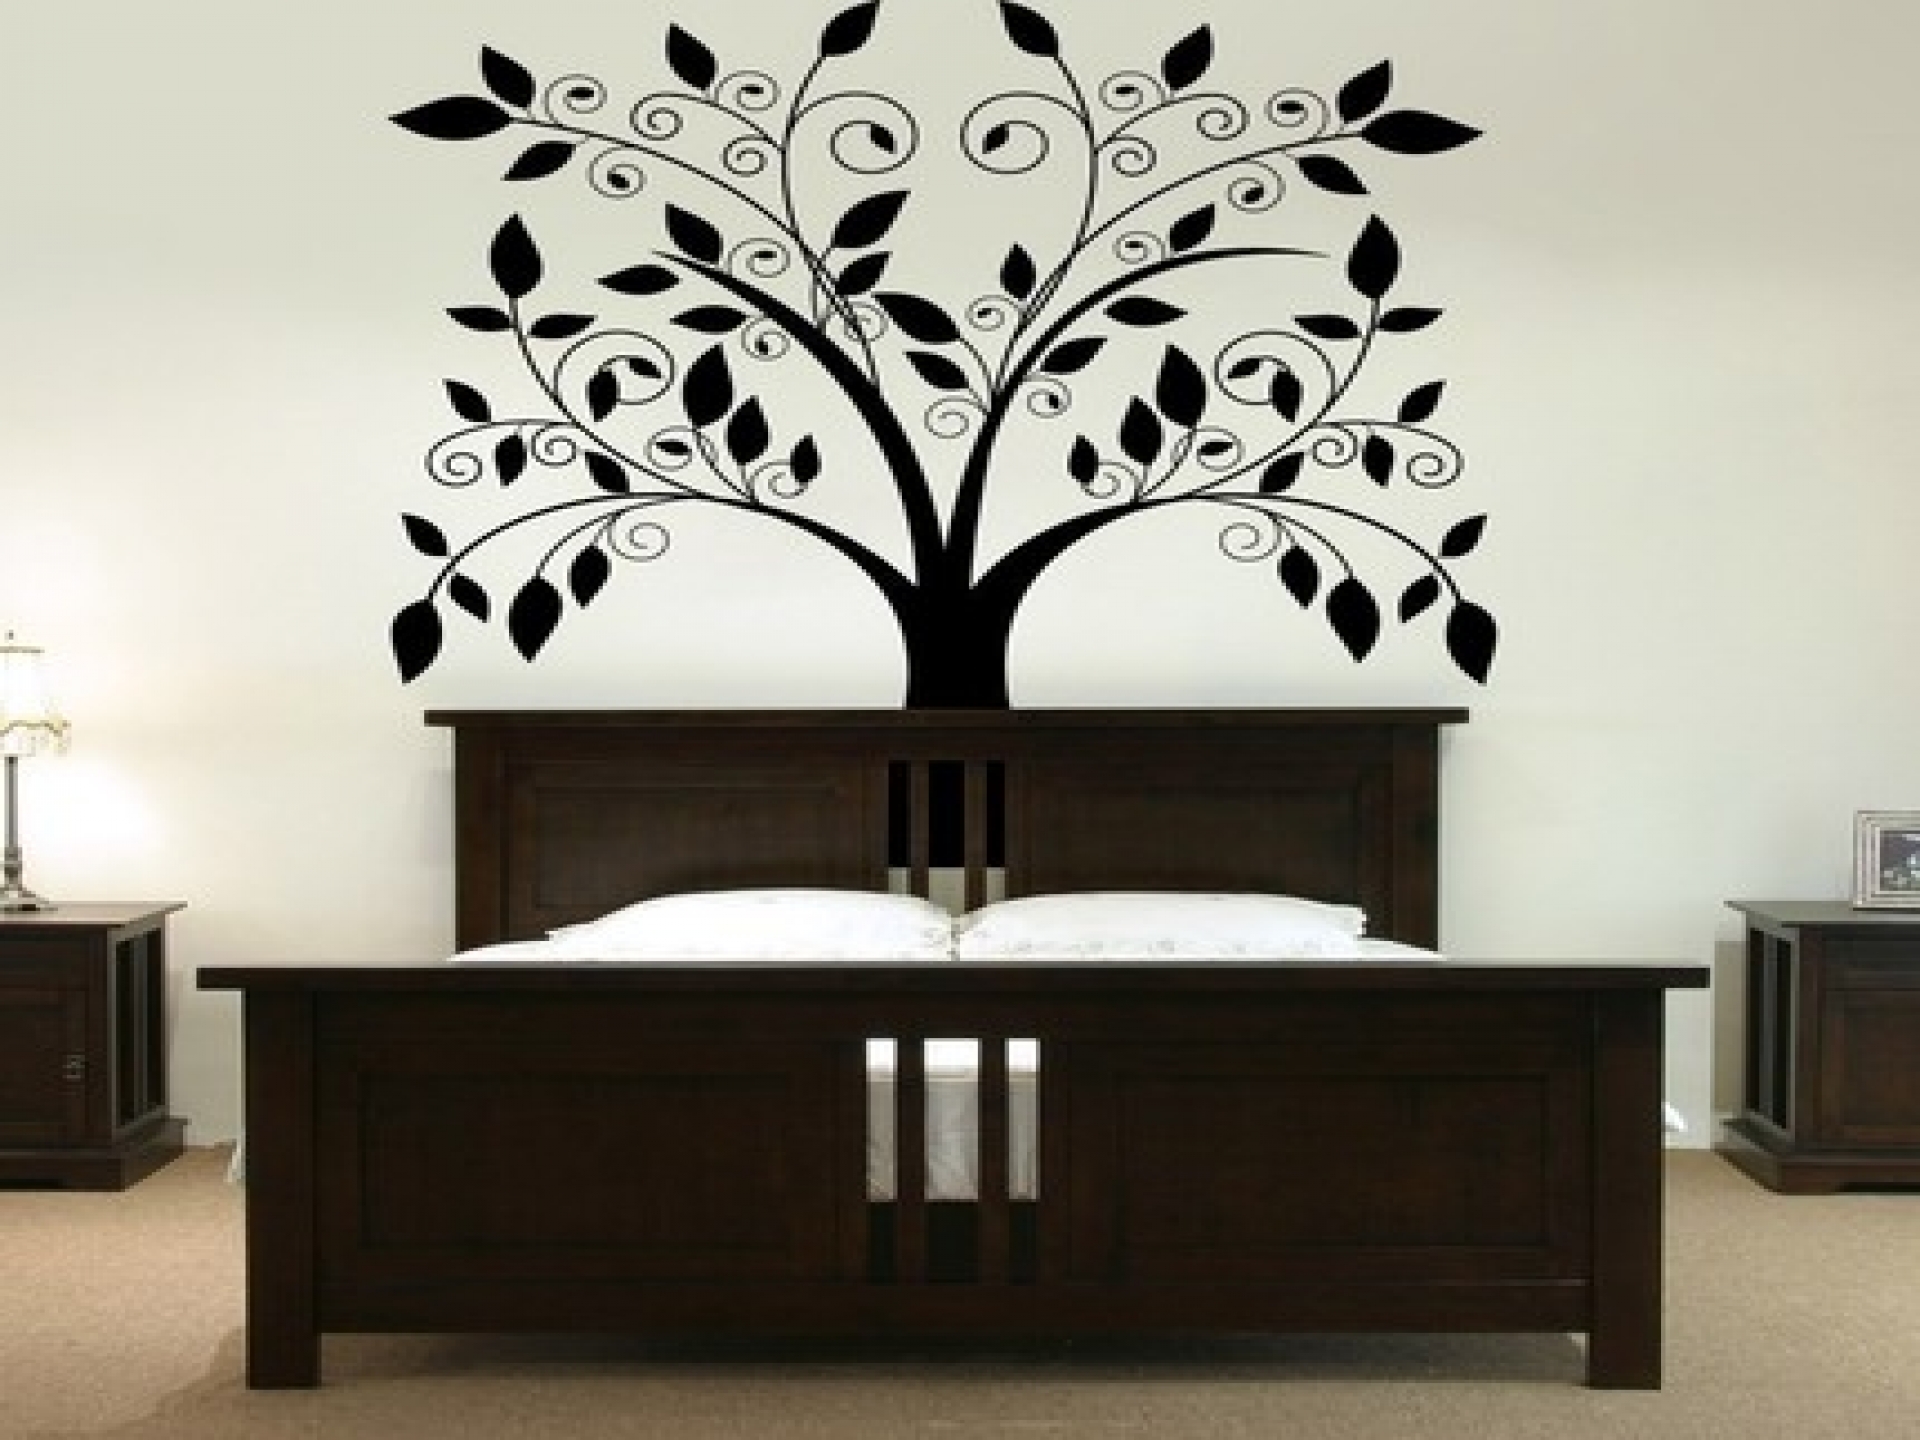 Creative Wall Decor: Transform Your Room With A Unique And Eye Catching Display